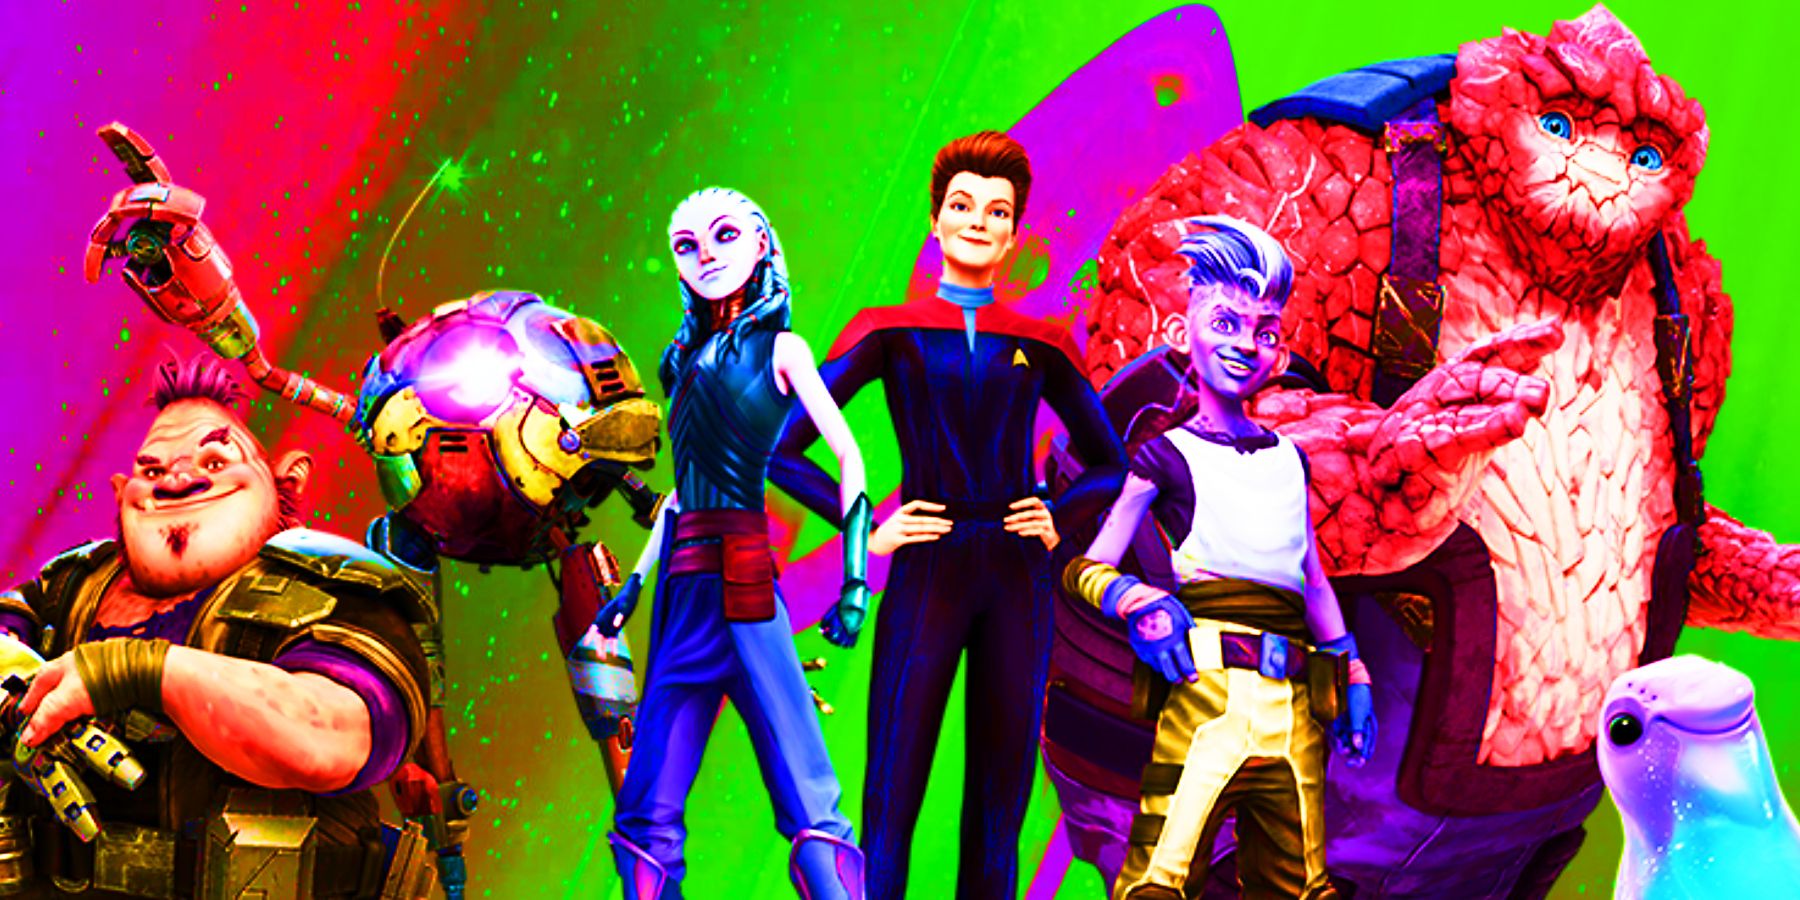 The Star Trek: Prodigy characters in front of a pink and green background